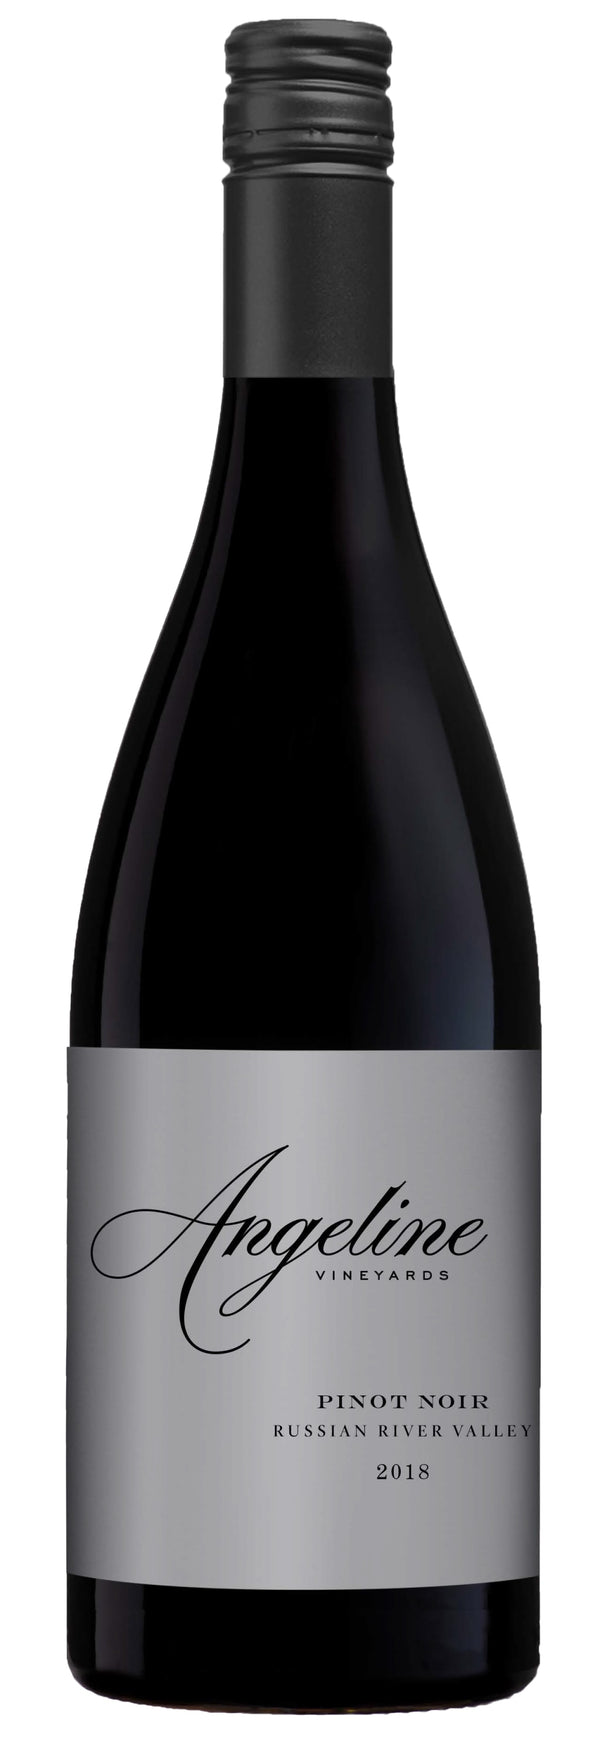 Angeline Pinot Noir, Russian River Valley